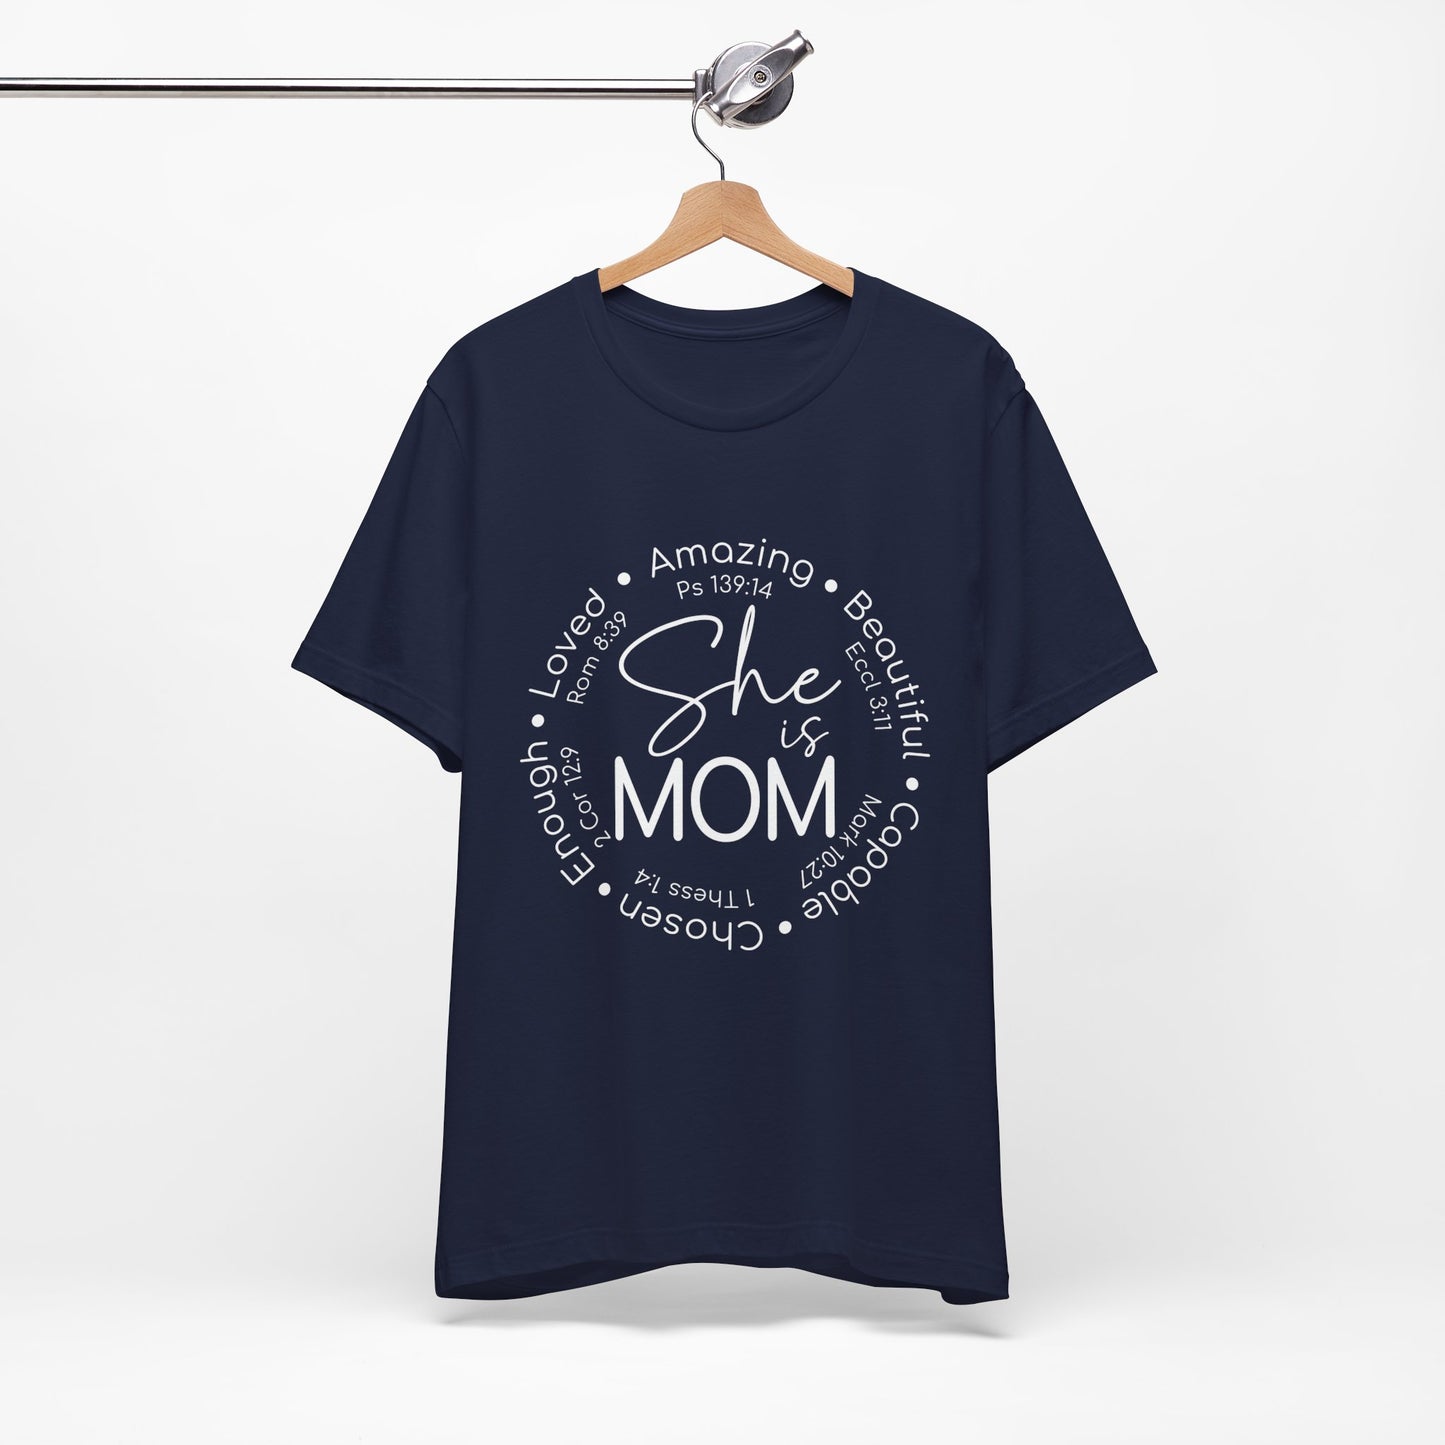 Mom T-Shirt, for both Women and Men